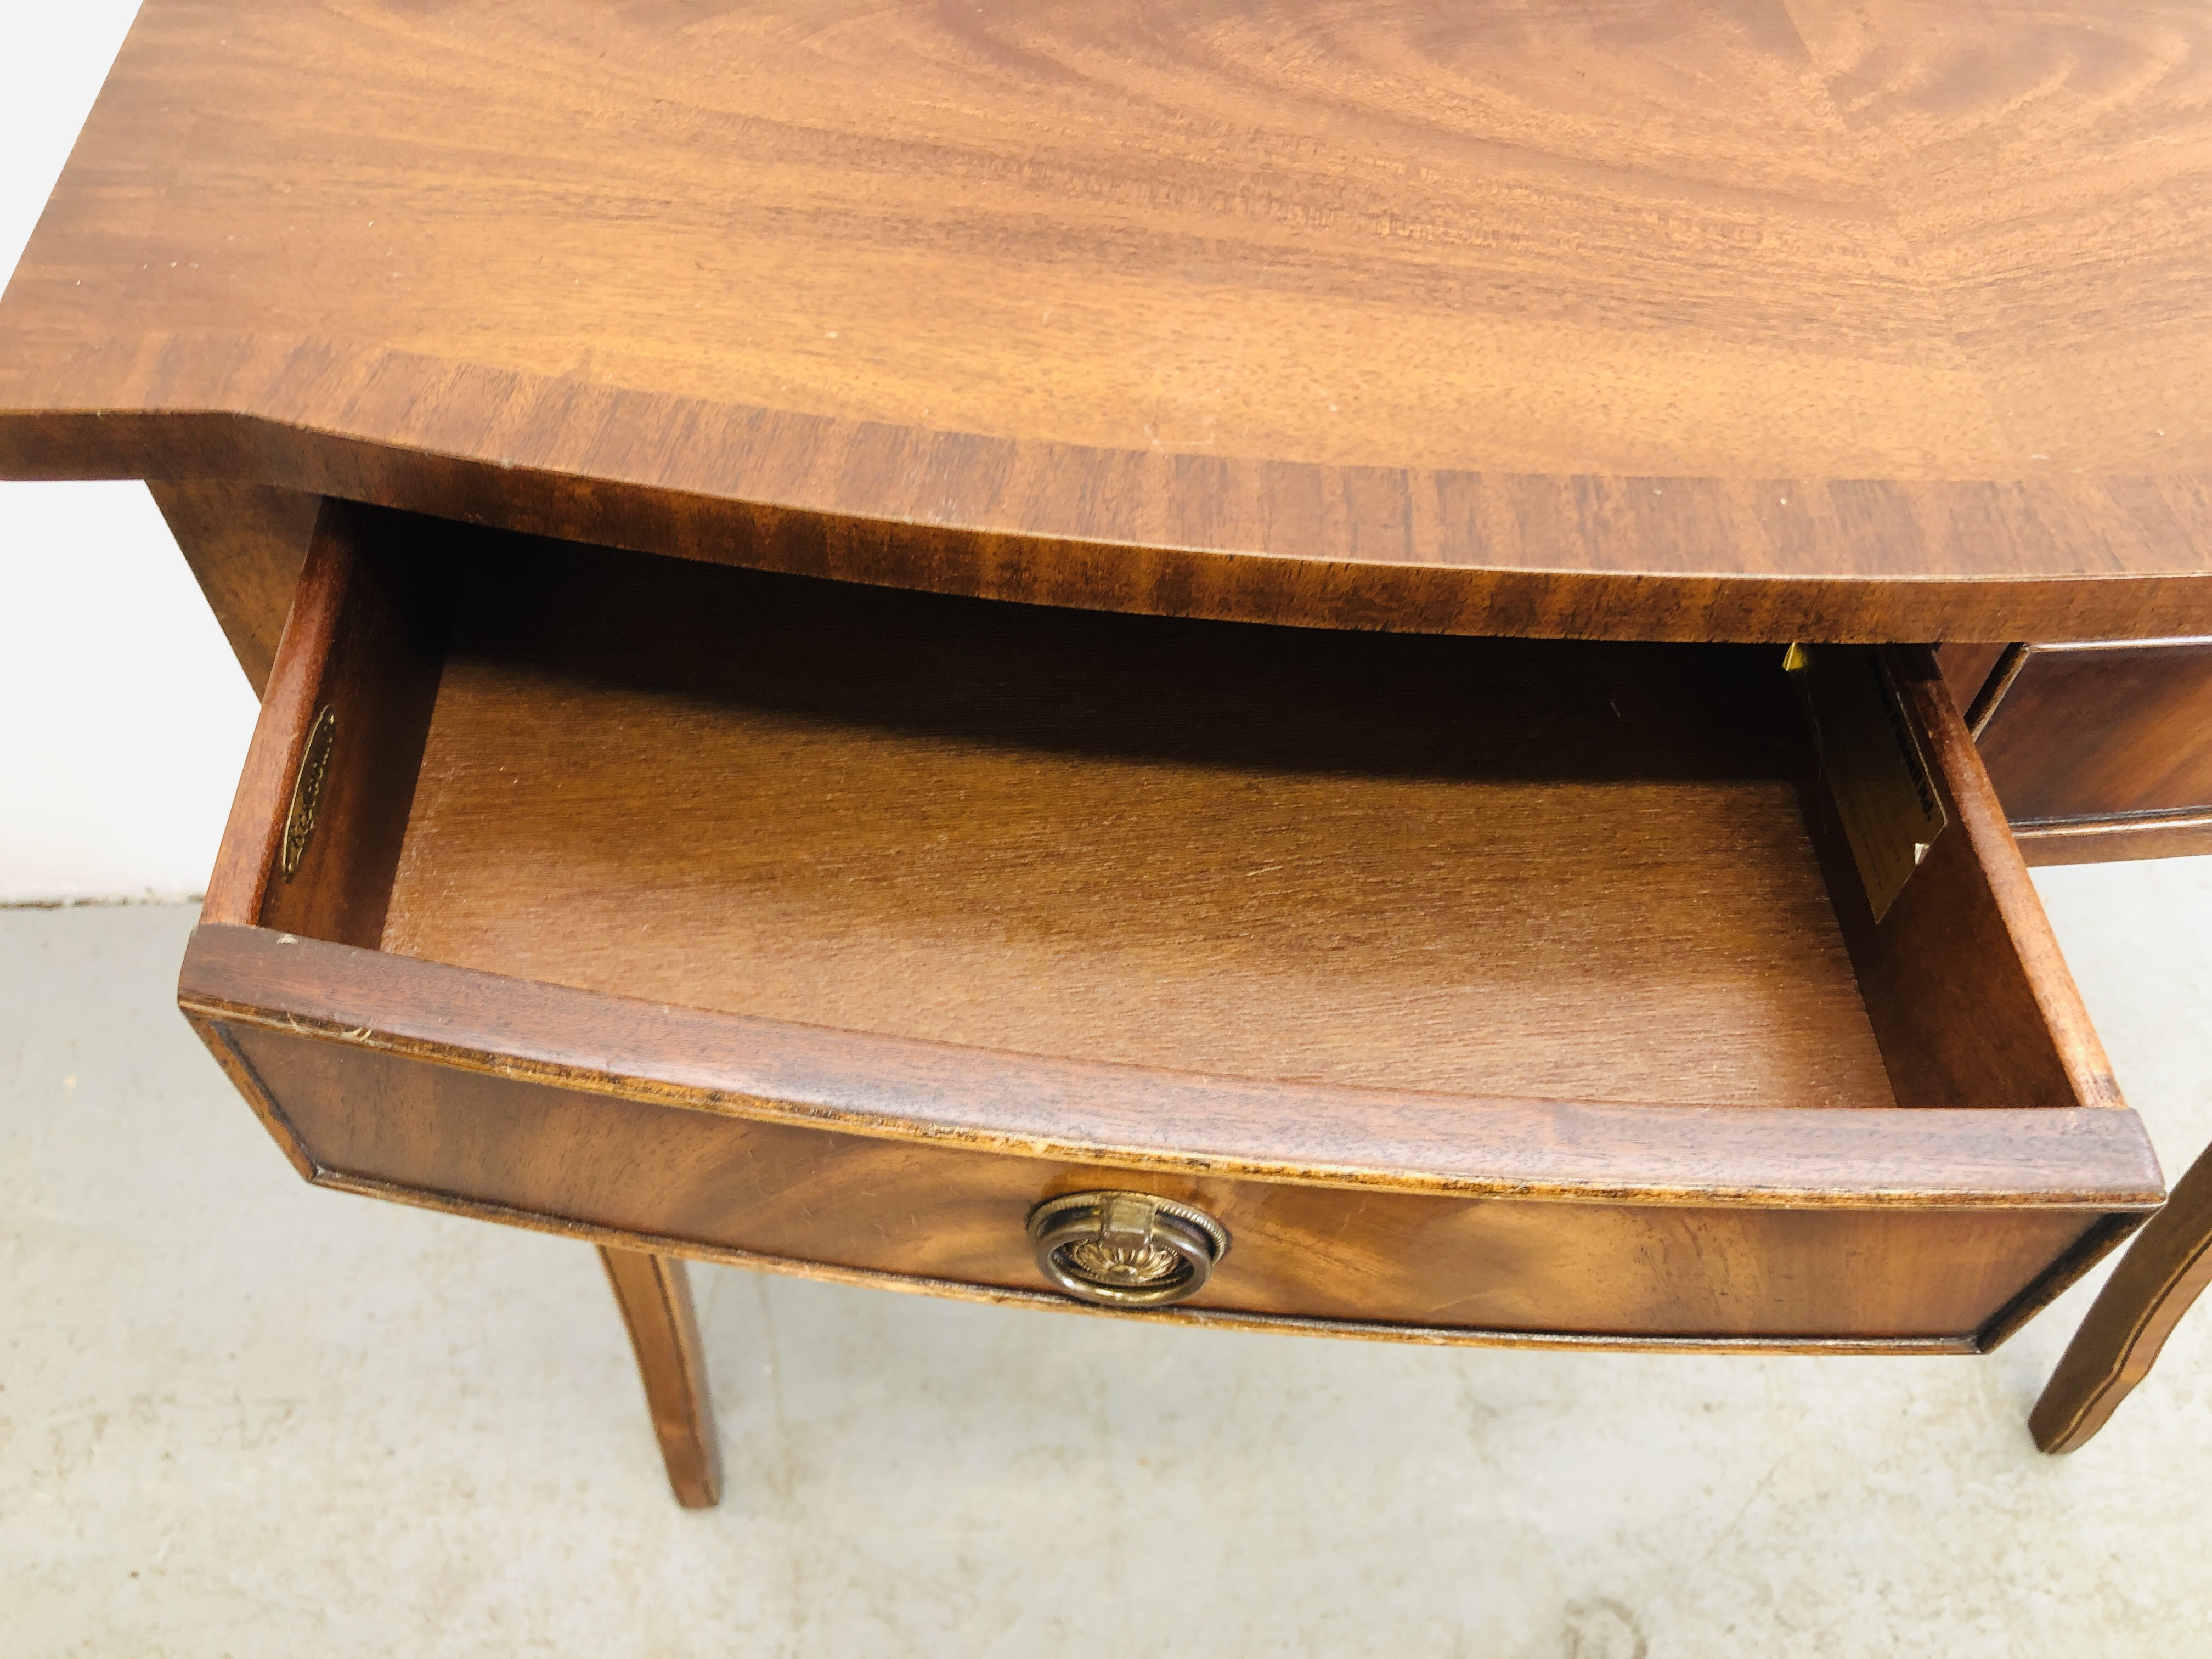 REPRODUCTION MAHOGANY FINISH COFFEE TABLE, BRADLEY MAKERS LABEL H 48CM, W 55CM, - Image 9 of 13